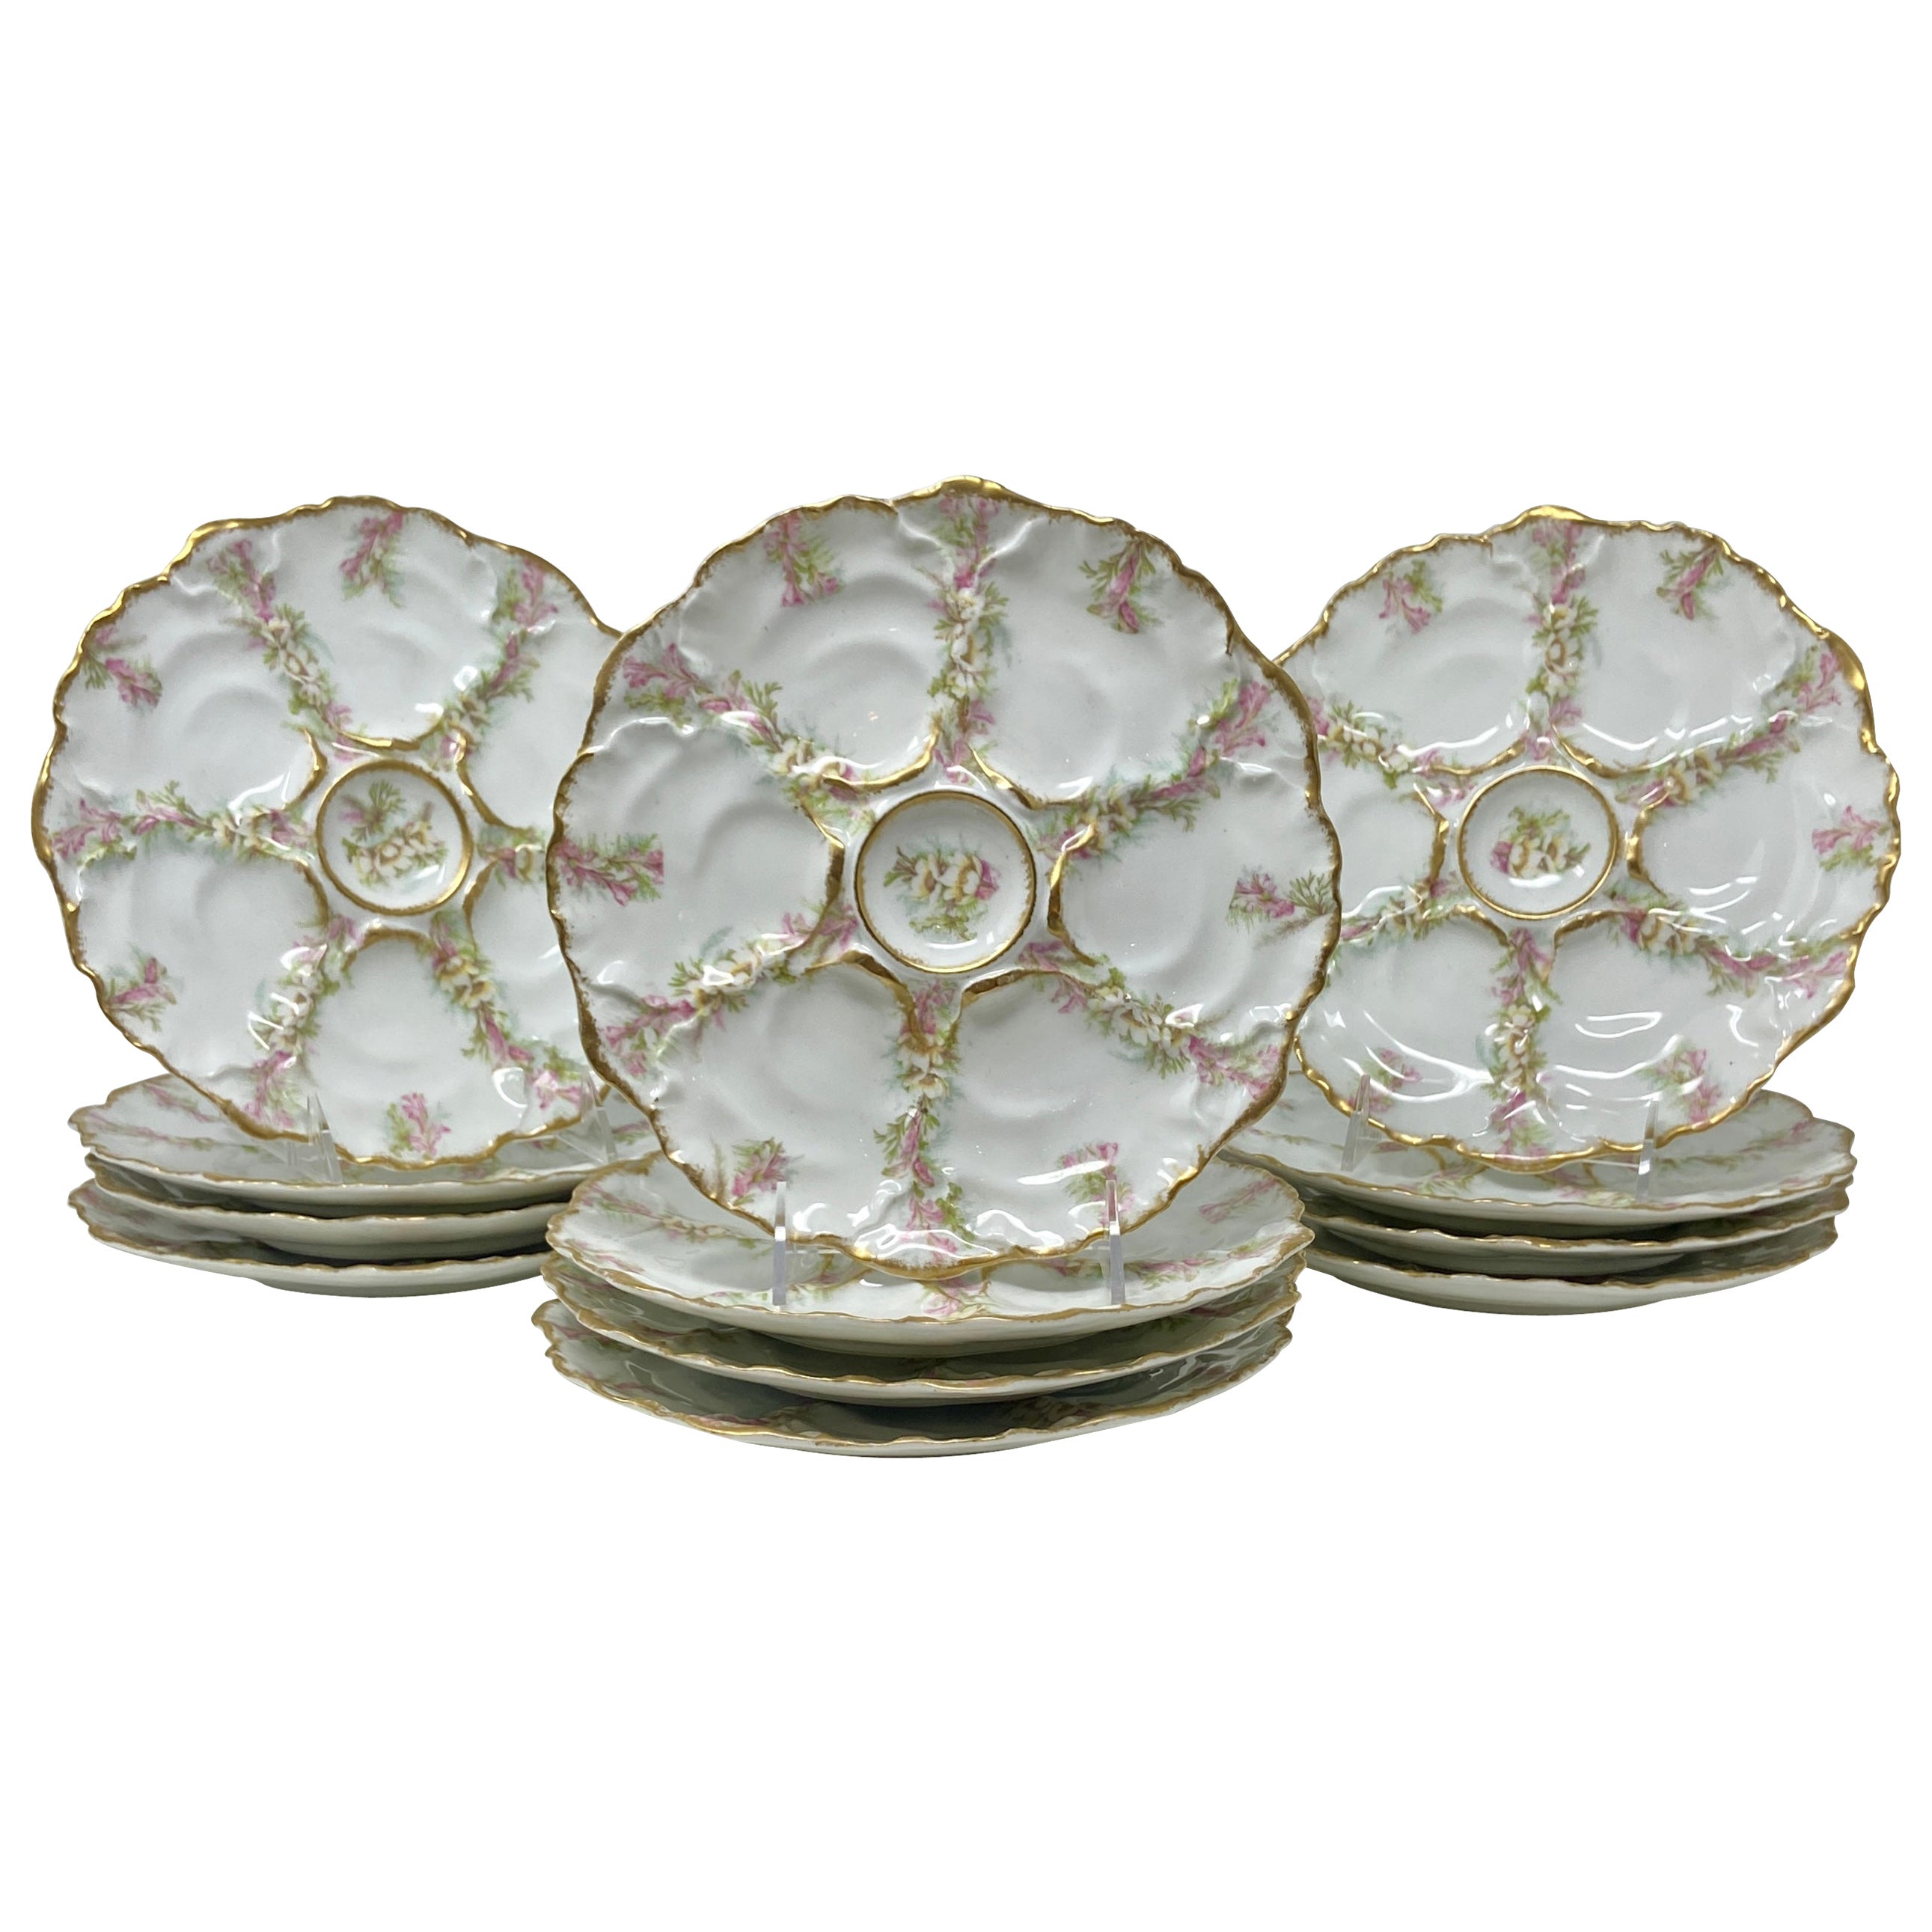 Set of 12 Antique French Limoges Porcelain Oyster Plates, Circa 1890-1900